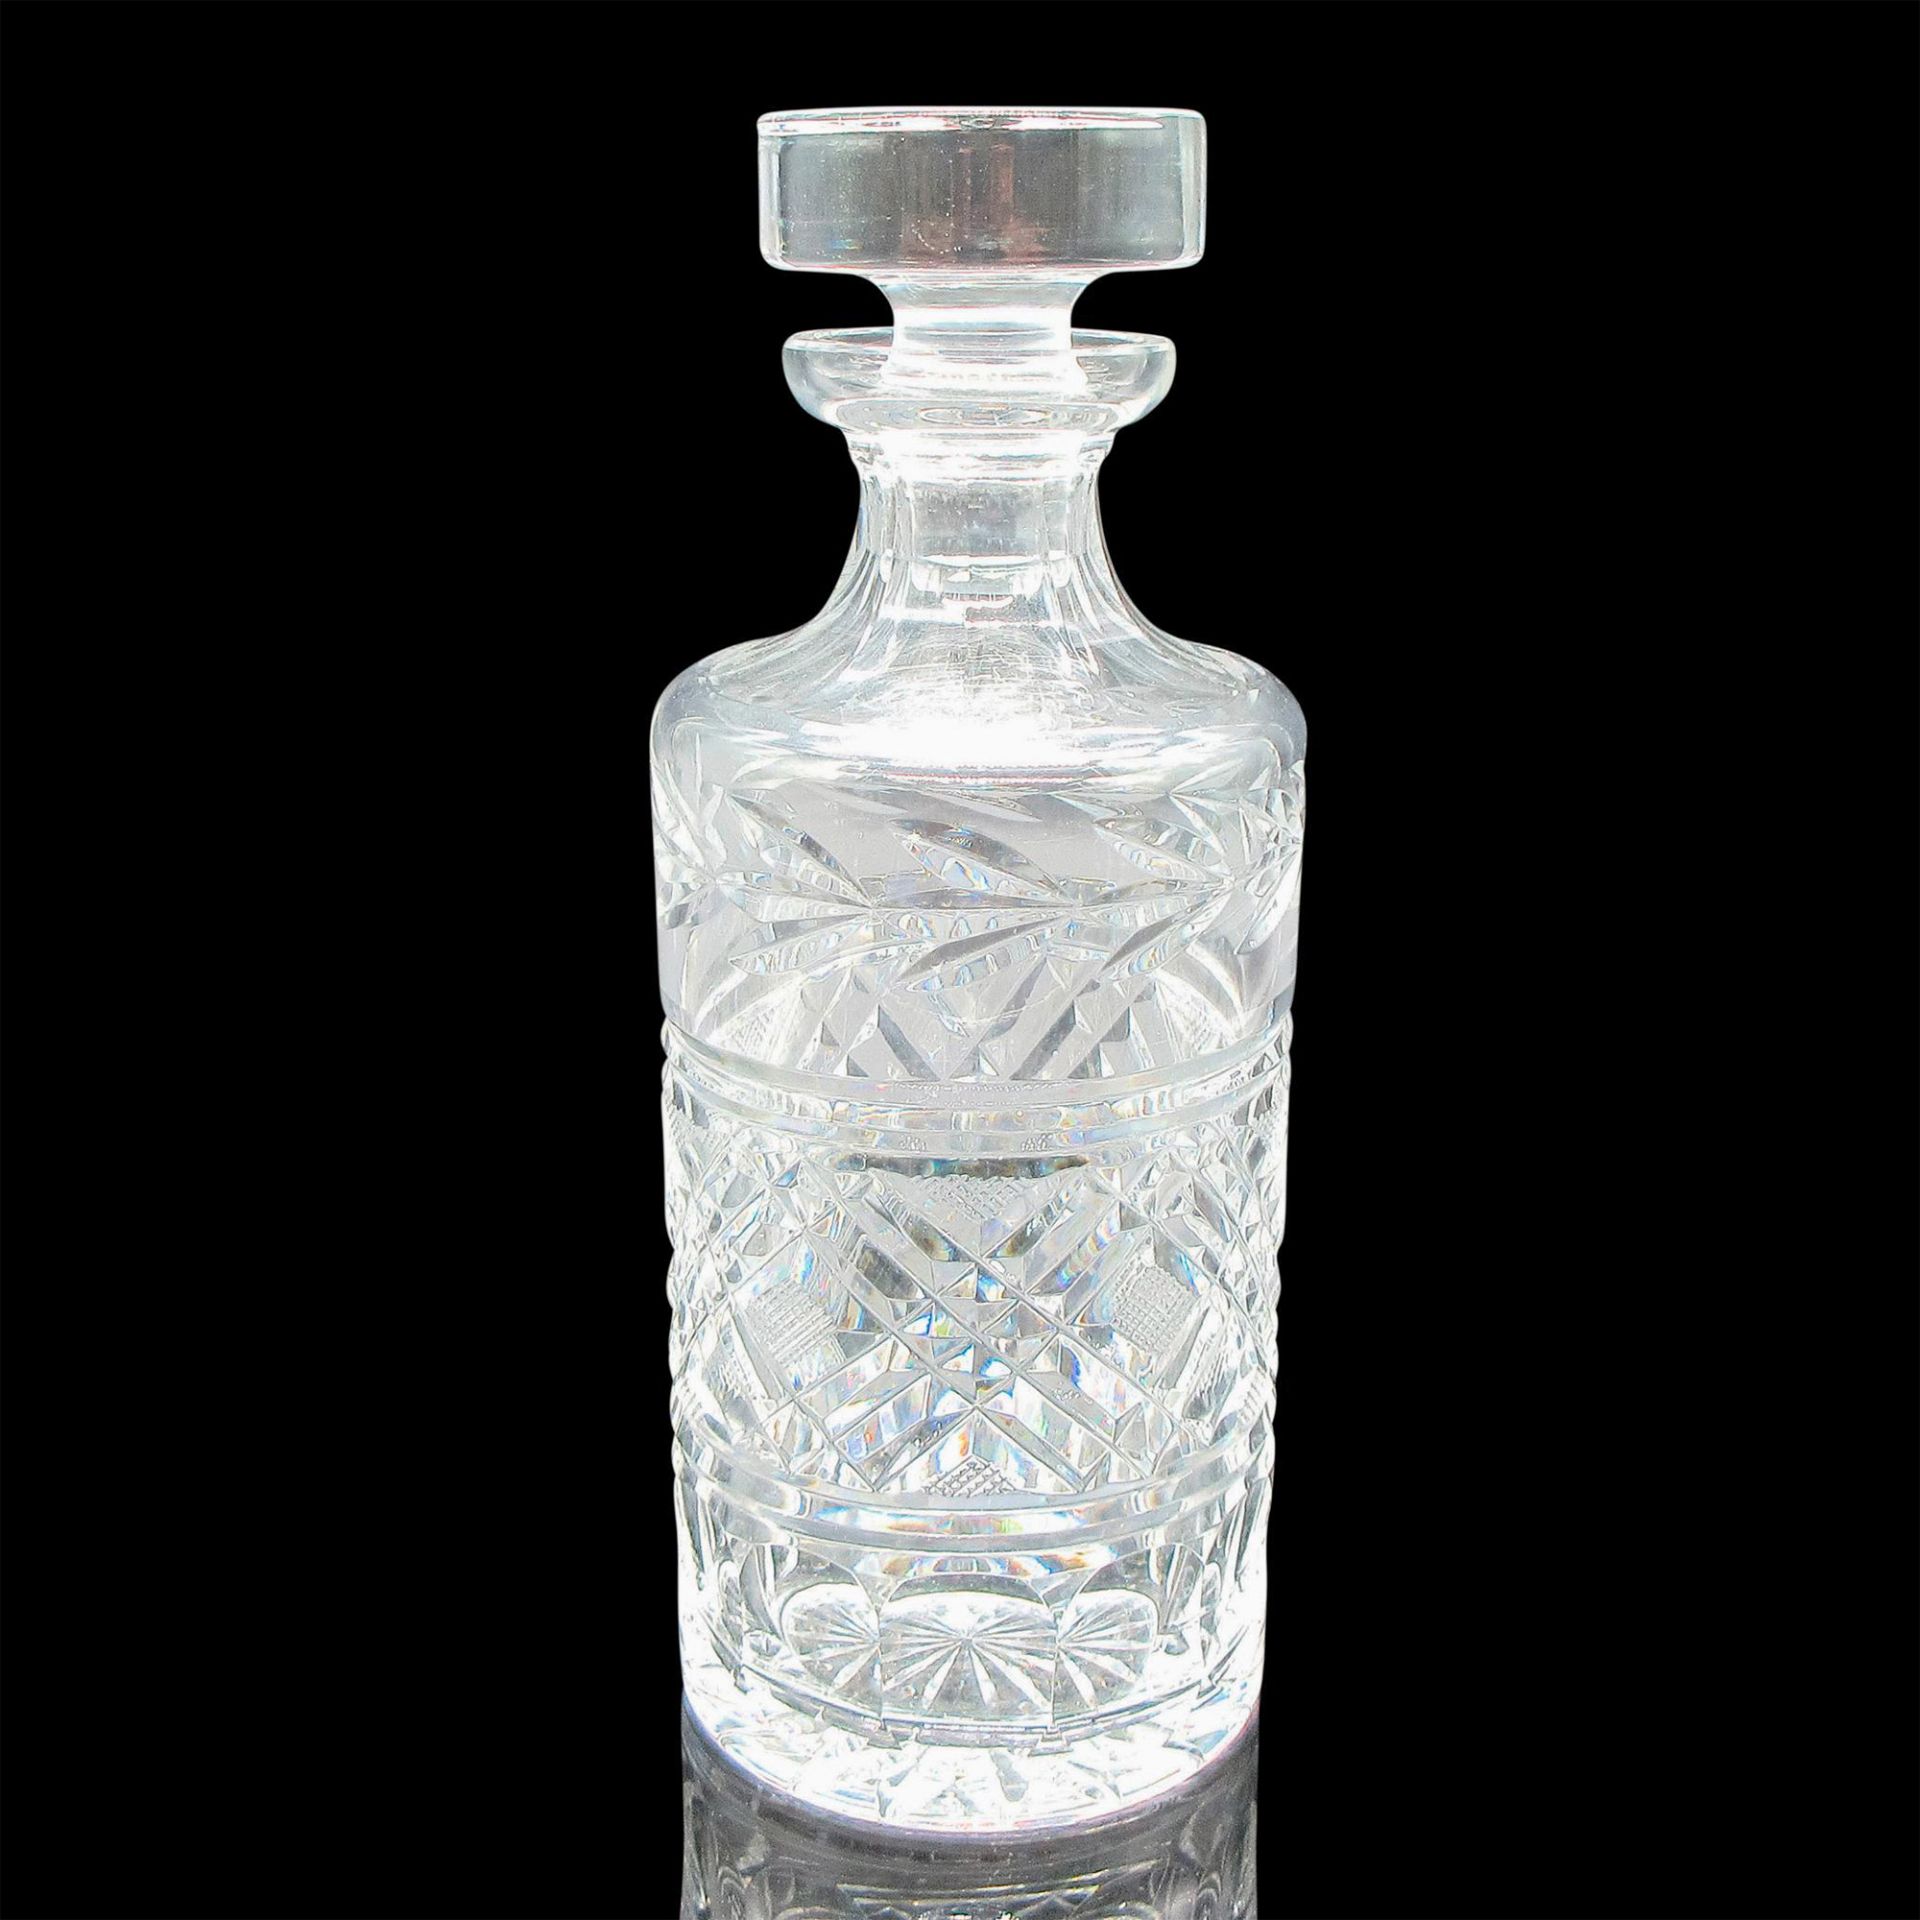 Waterford Crystal Decanter and Stopper, Laurel Criss Cross